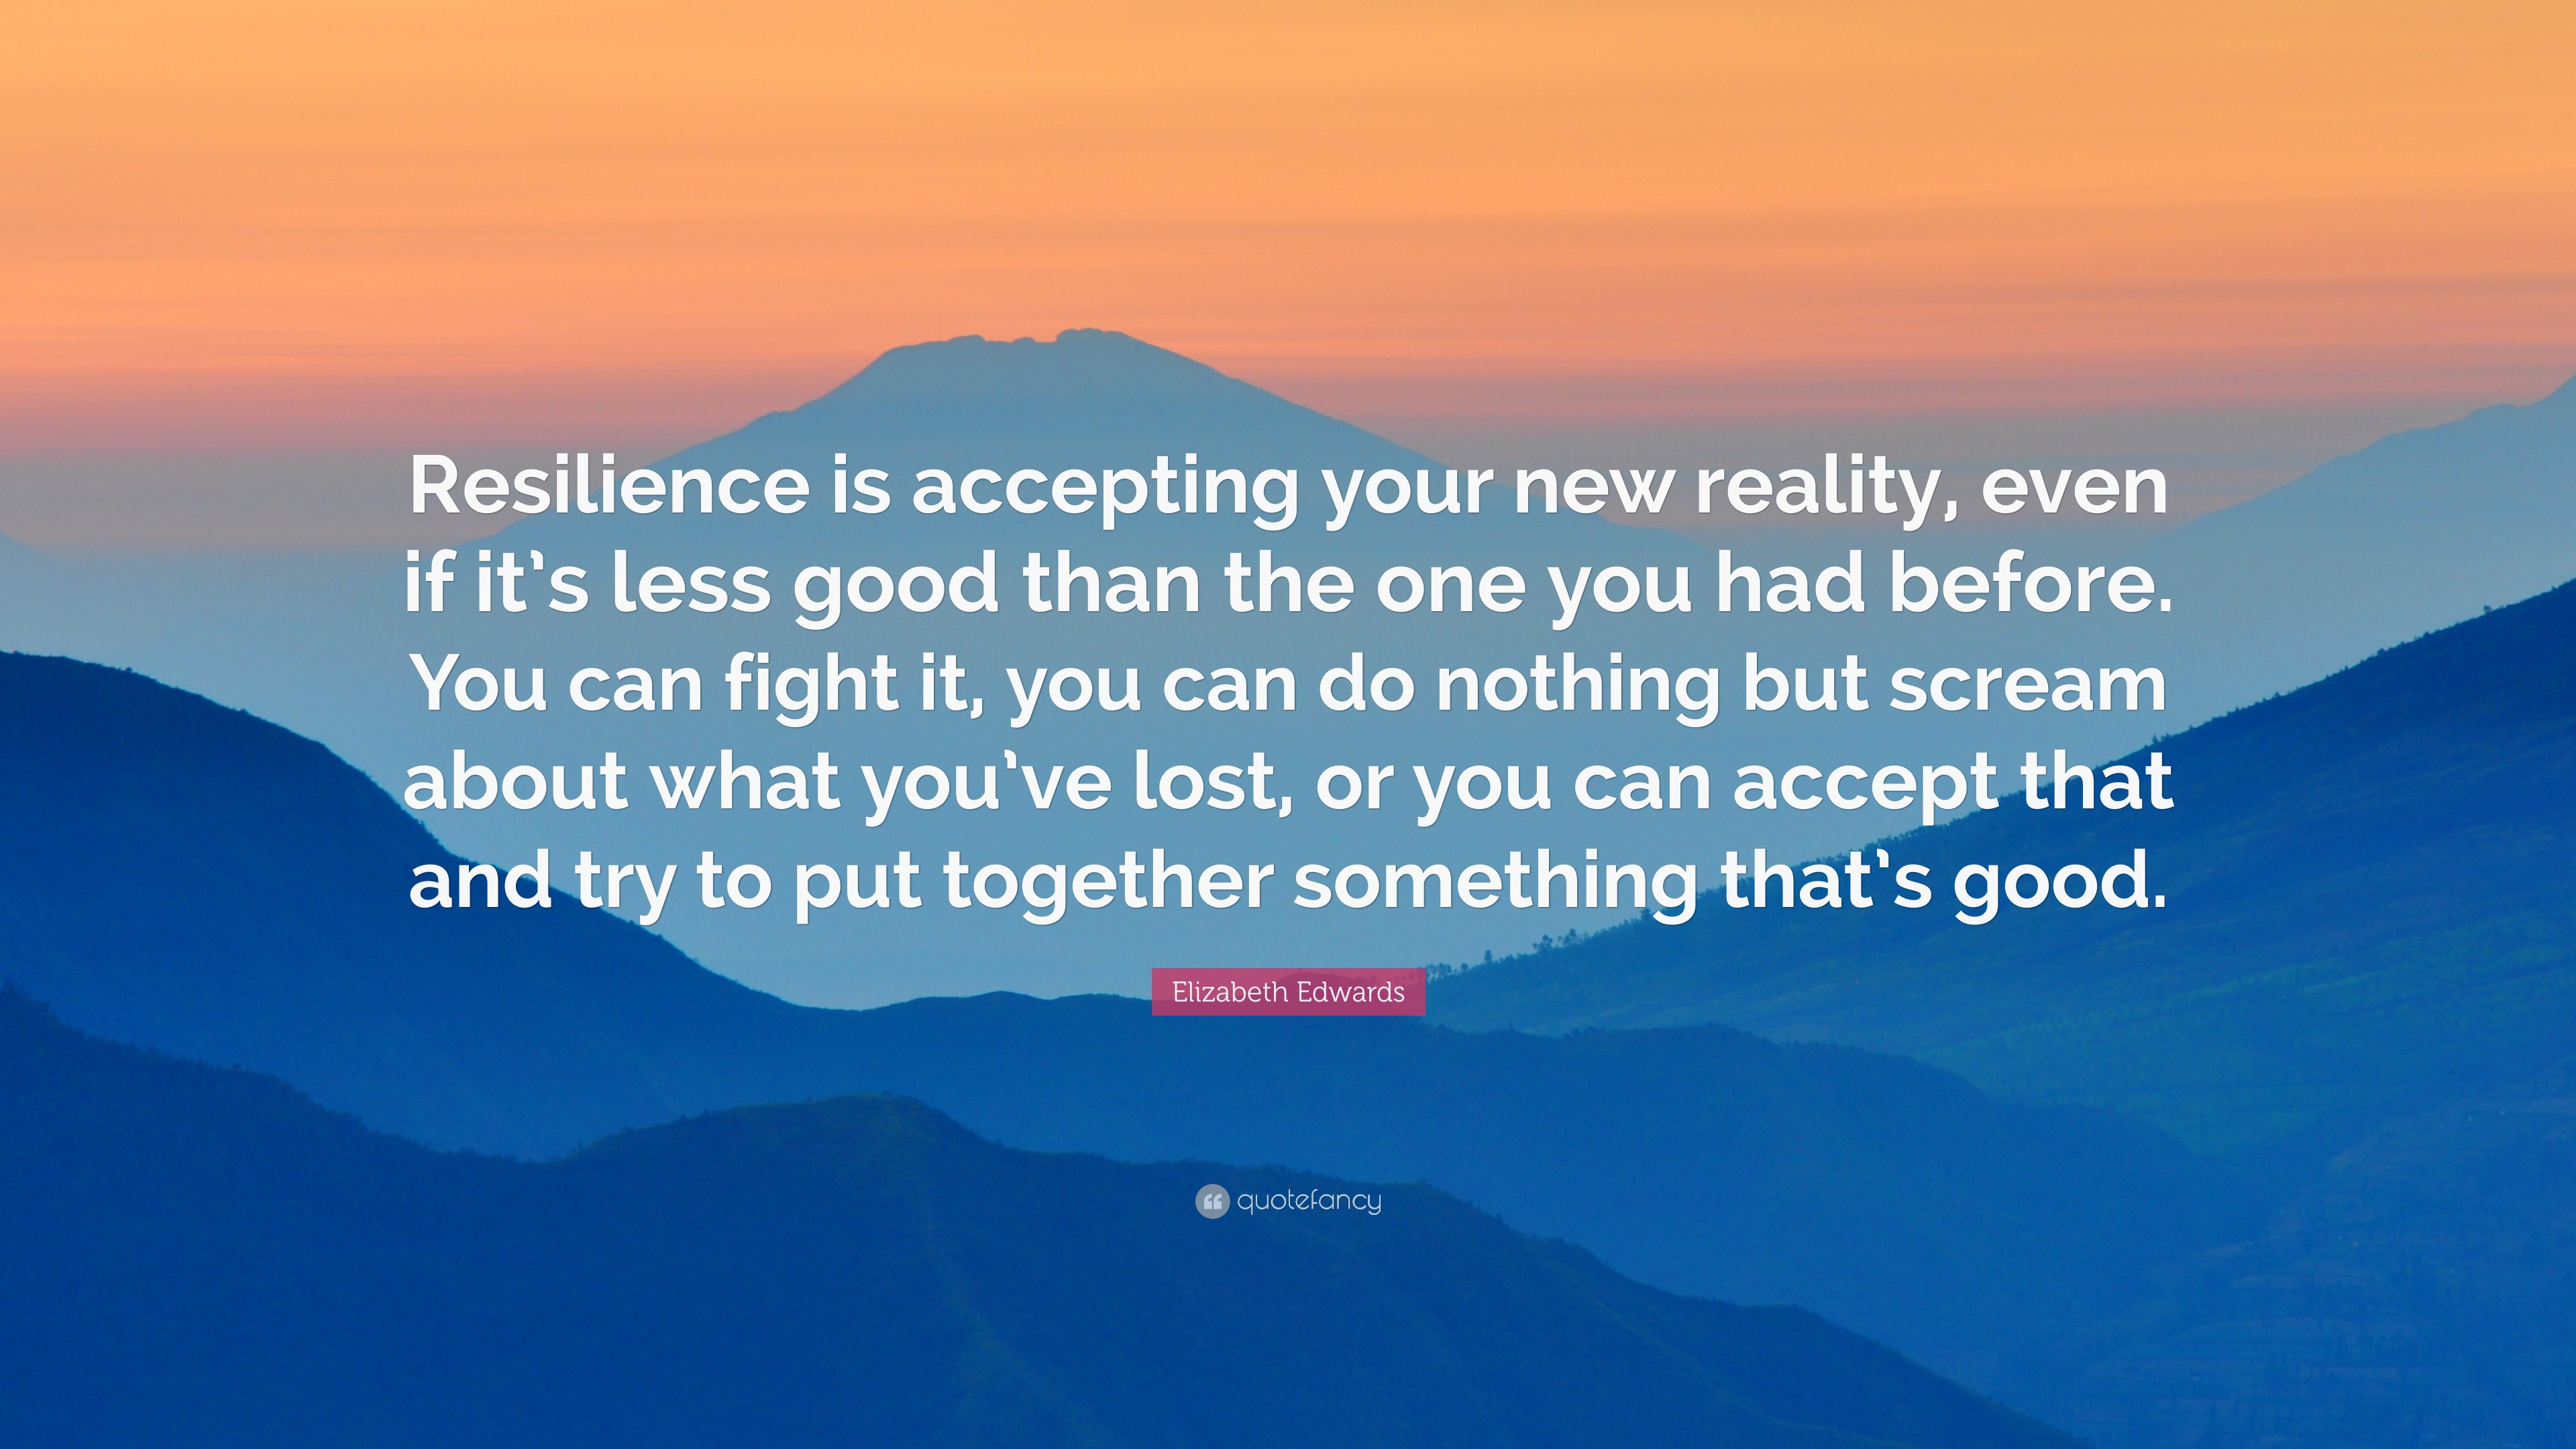 Elizabeth Edwards Quote “Resilience is accepting your new